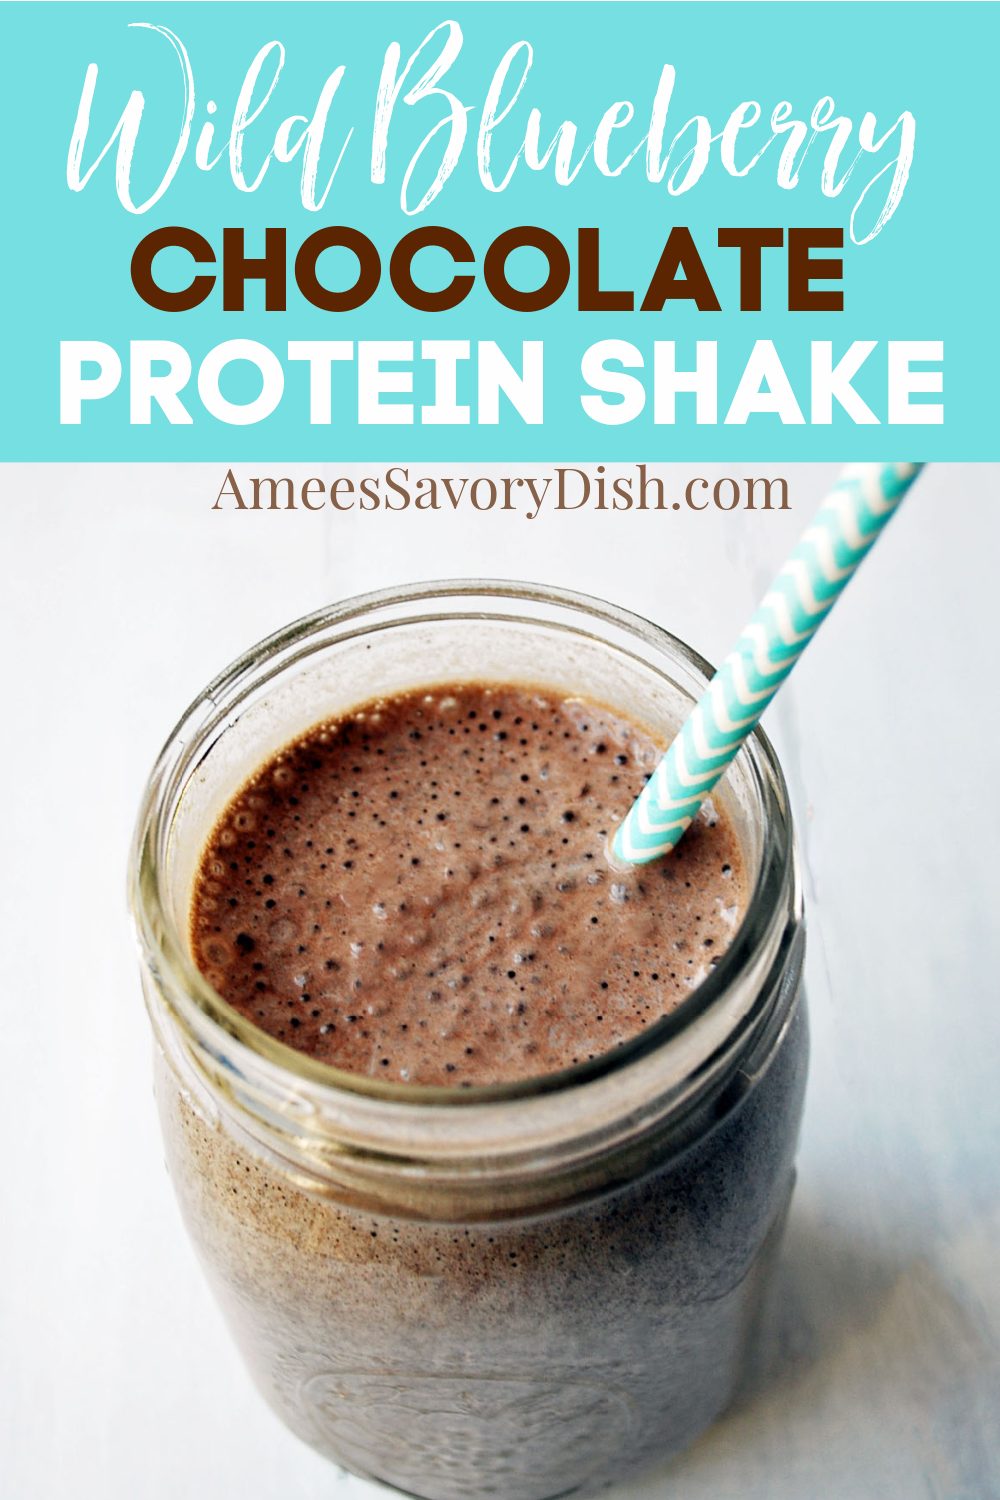 This Wild Blueberry Chocolate Protein Shake is a quick and delicious protein shake recipe made with wild frozen blueberries, chocolate whey protein powder, ground flaxseed, and almond milk. #proteinshake #blueberryproteinshake #chocolateproteinshake via @Ameessavorydish